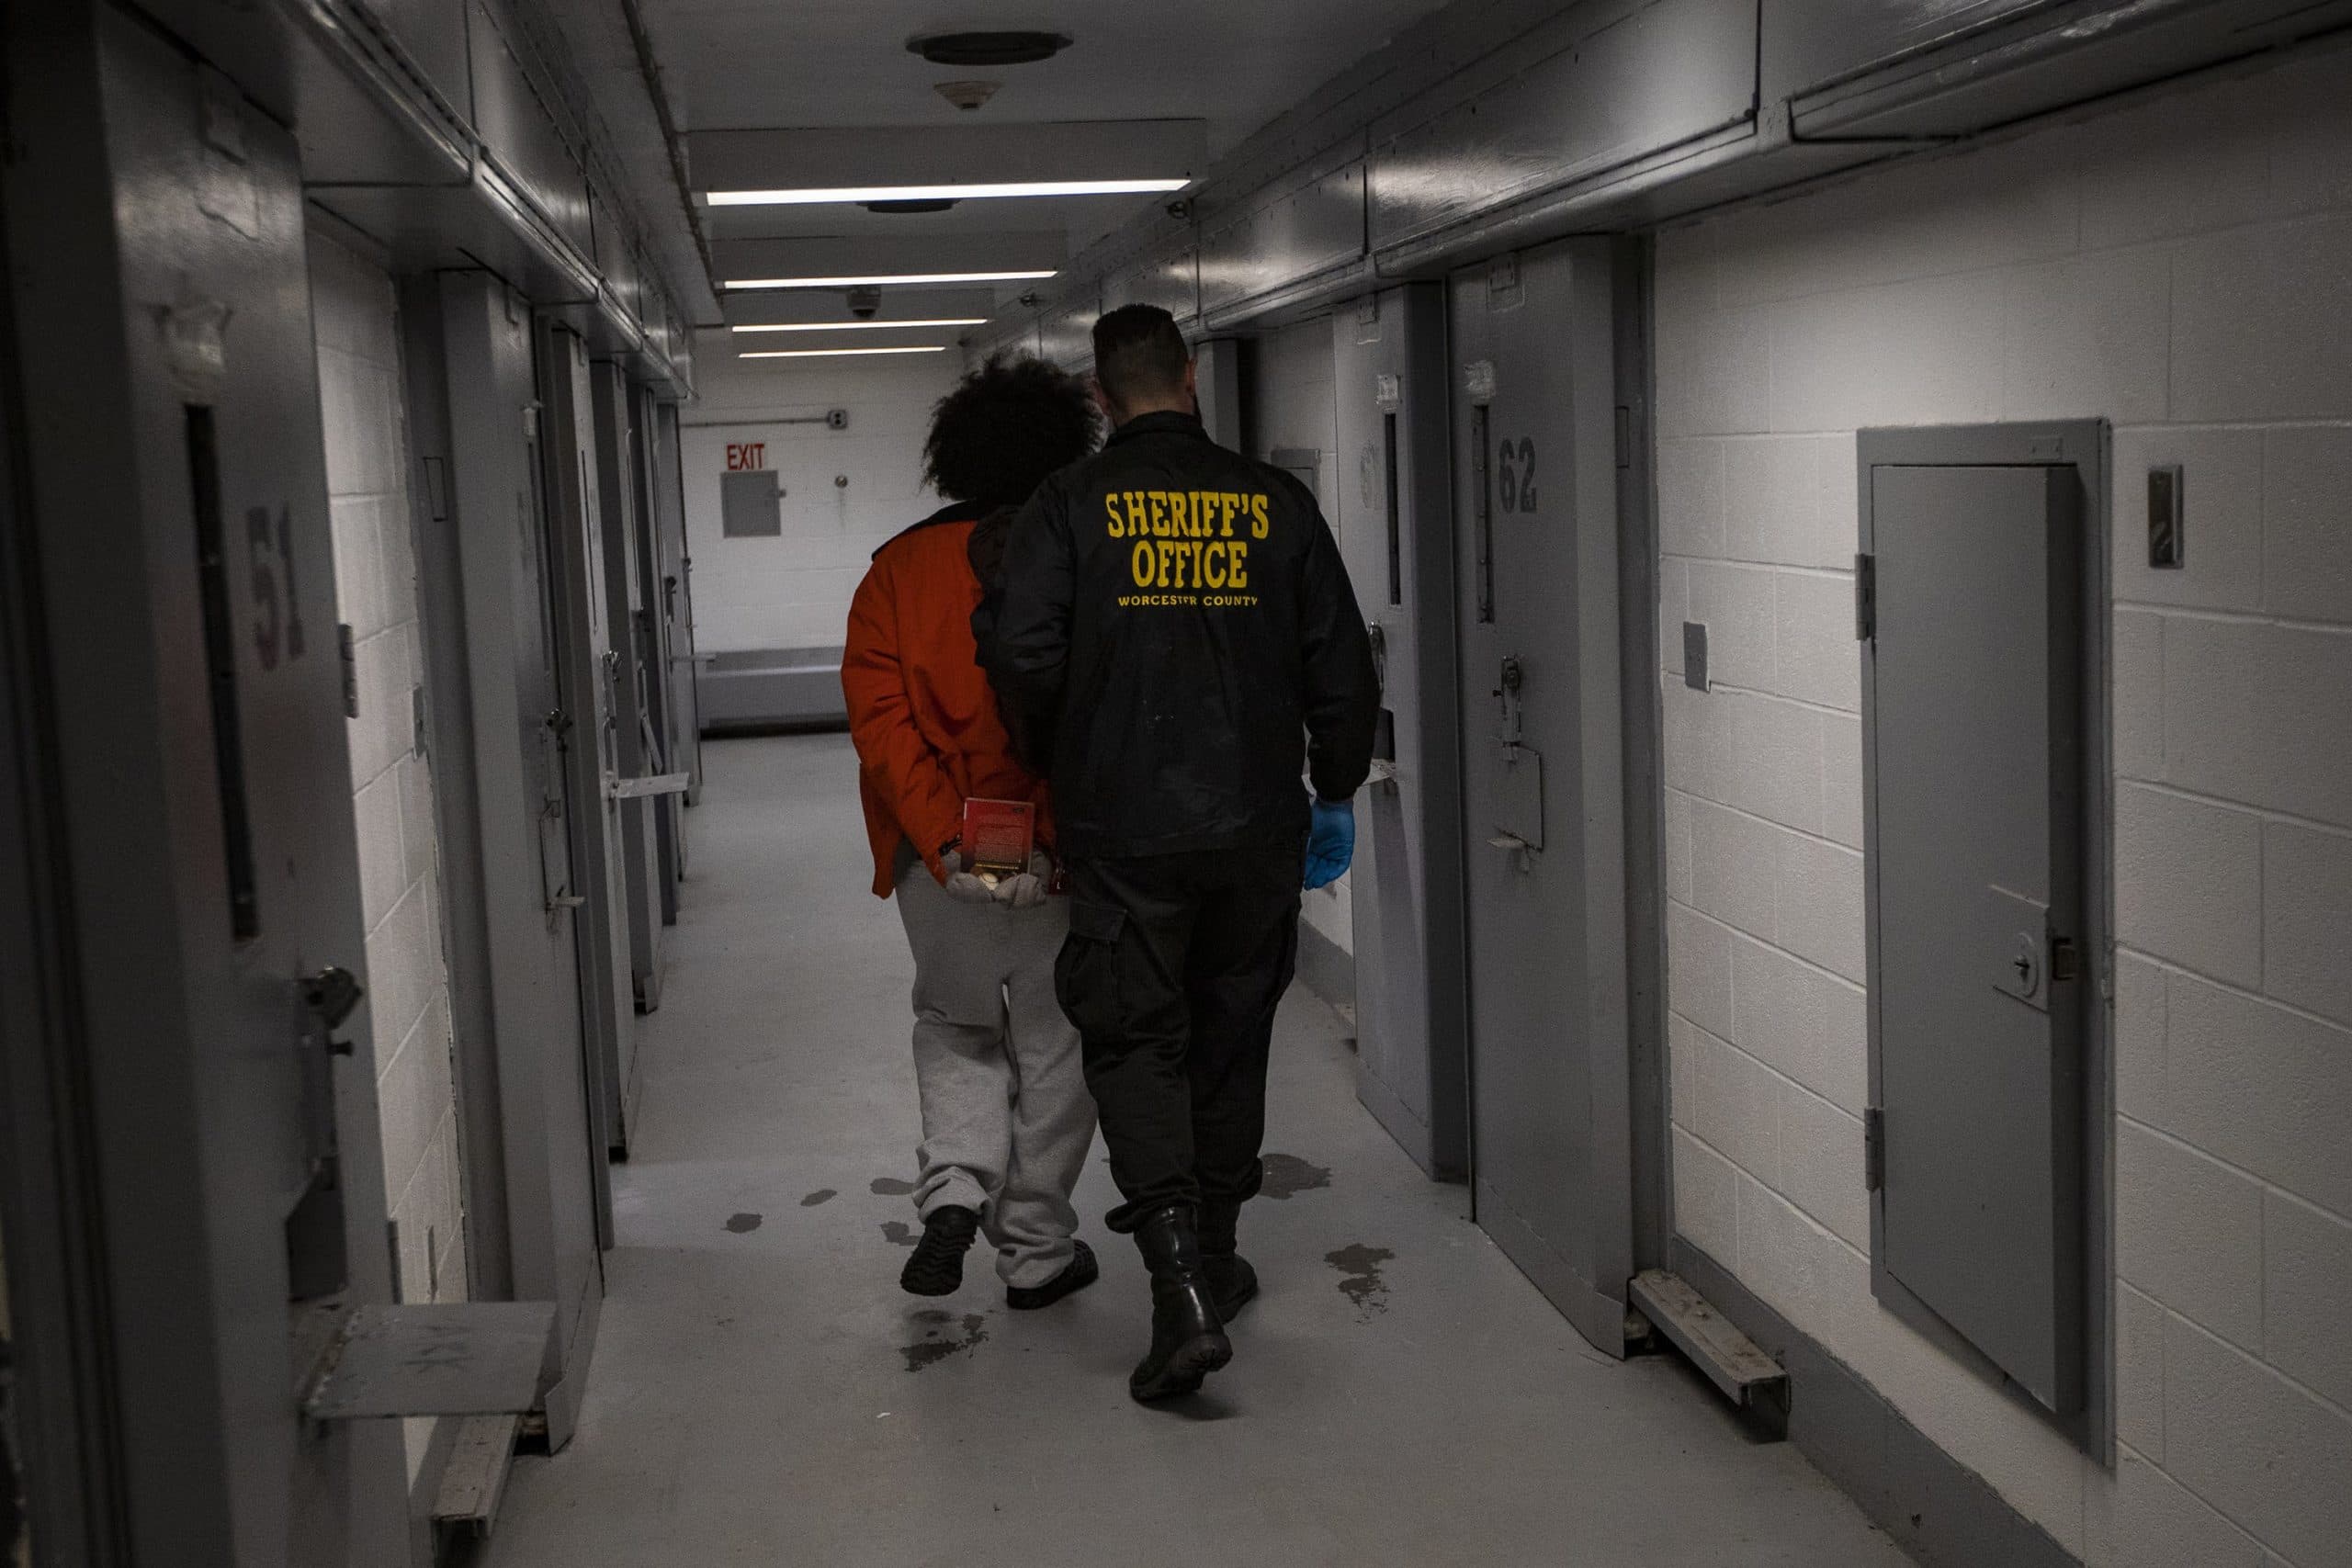 When Inmates Die Of Poor Medical Care Jails Often Keep It Secret Investigations